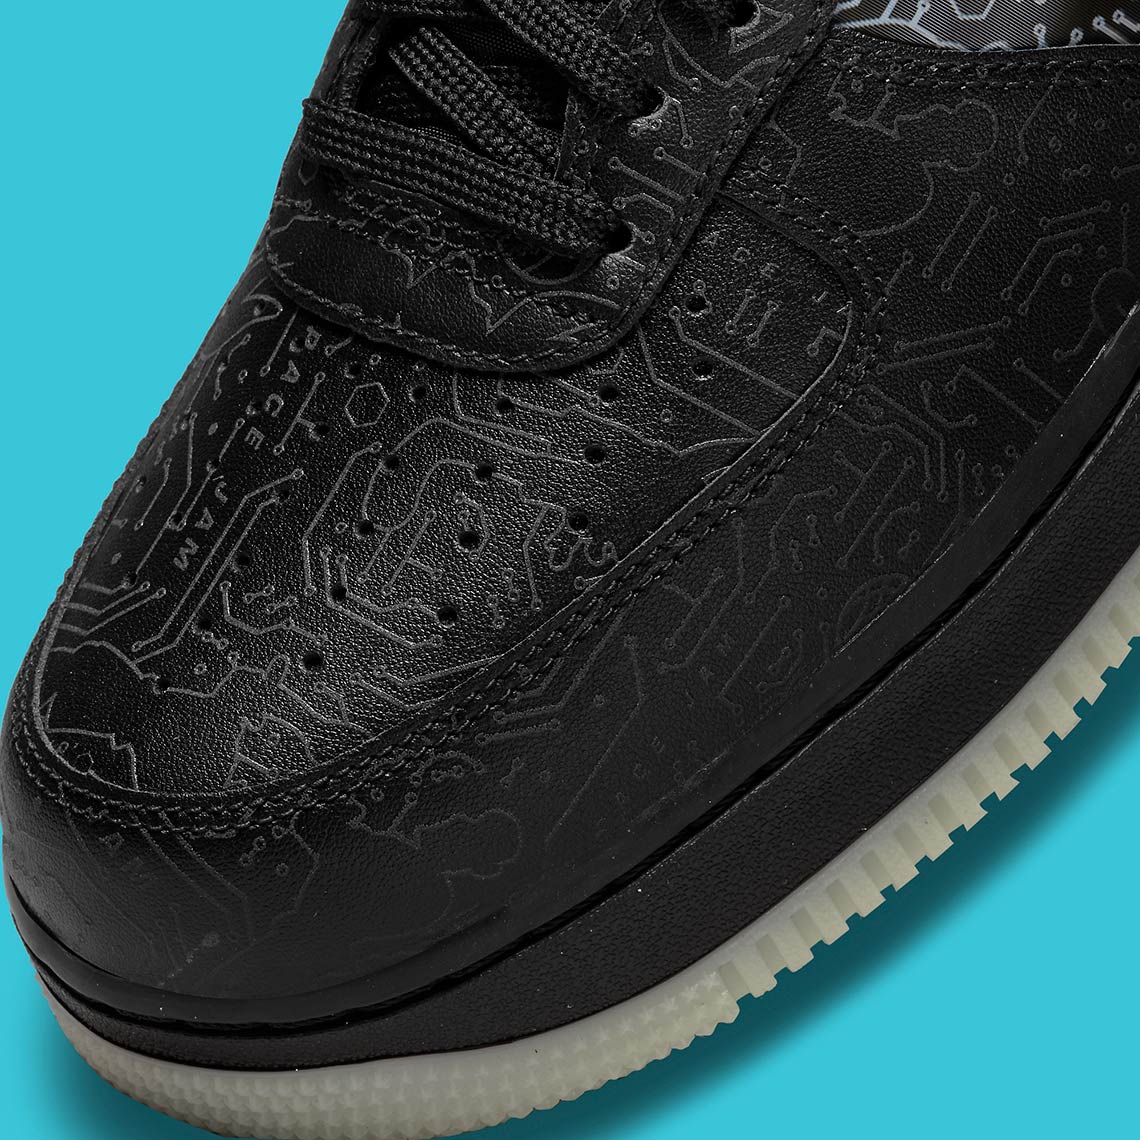 Space Jam nike Wmns Air Force 1 Computer Chip DH5354 001 7